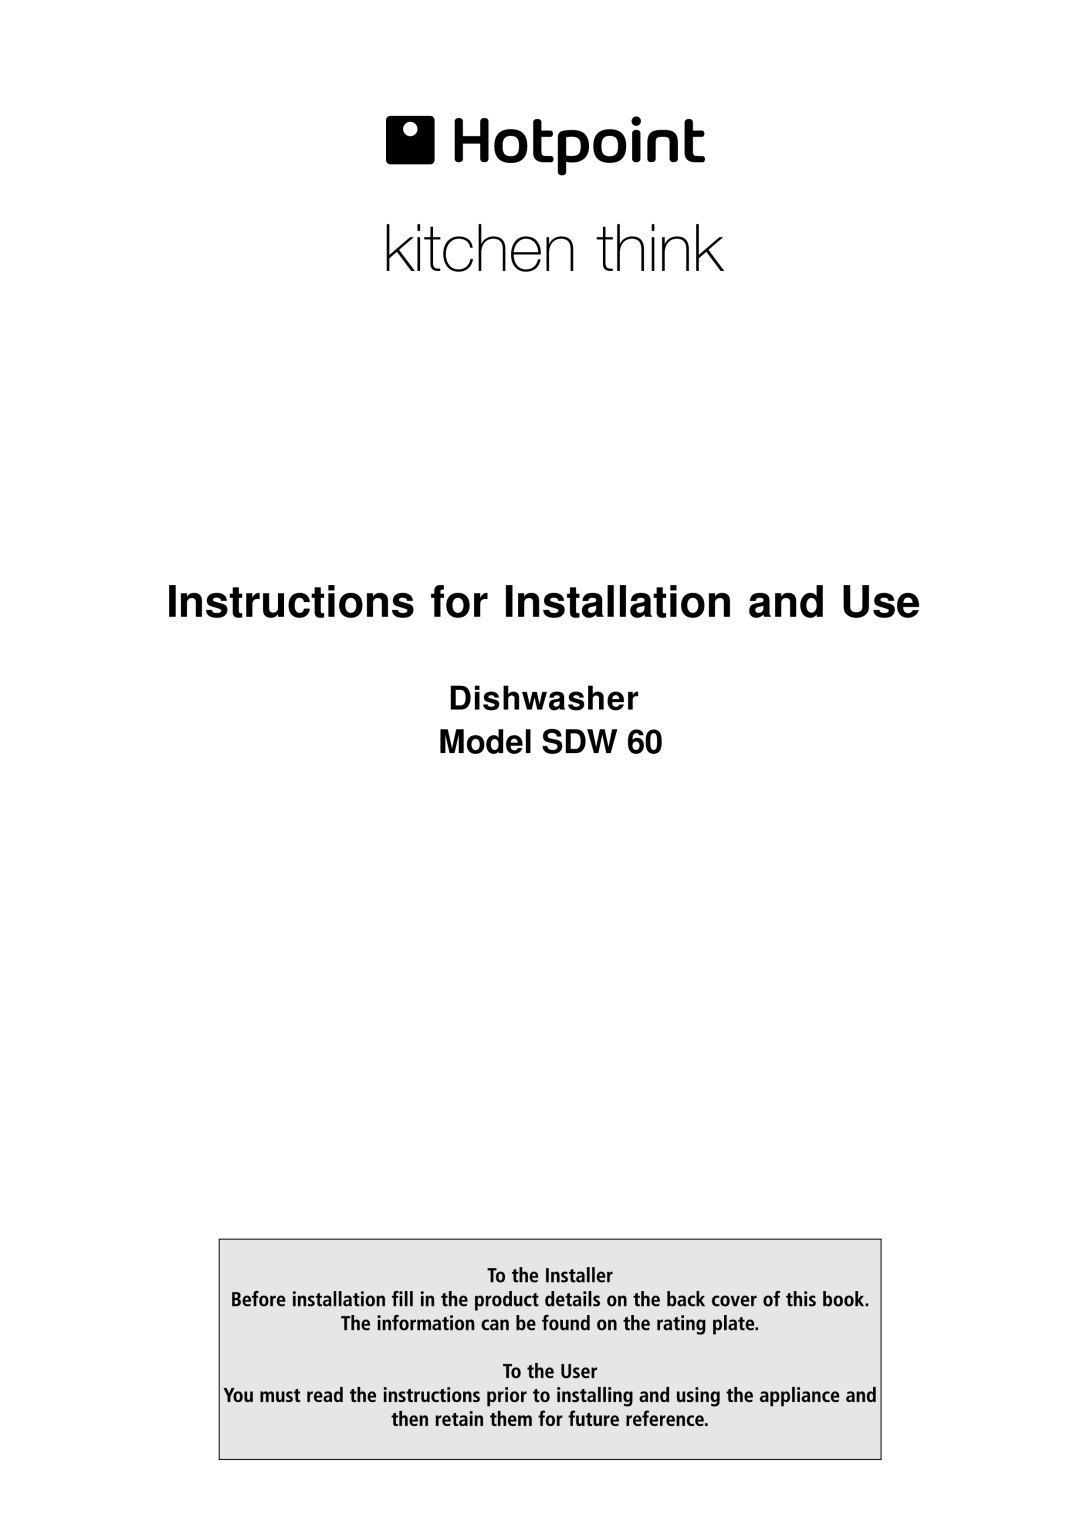 Hotpoint SDW 60 manual Instructions for Installation and Use, Dishwasher Model SDW 